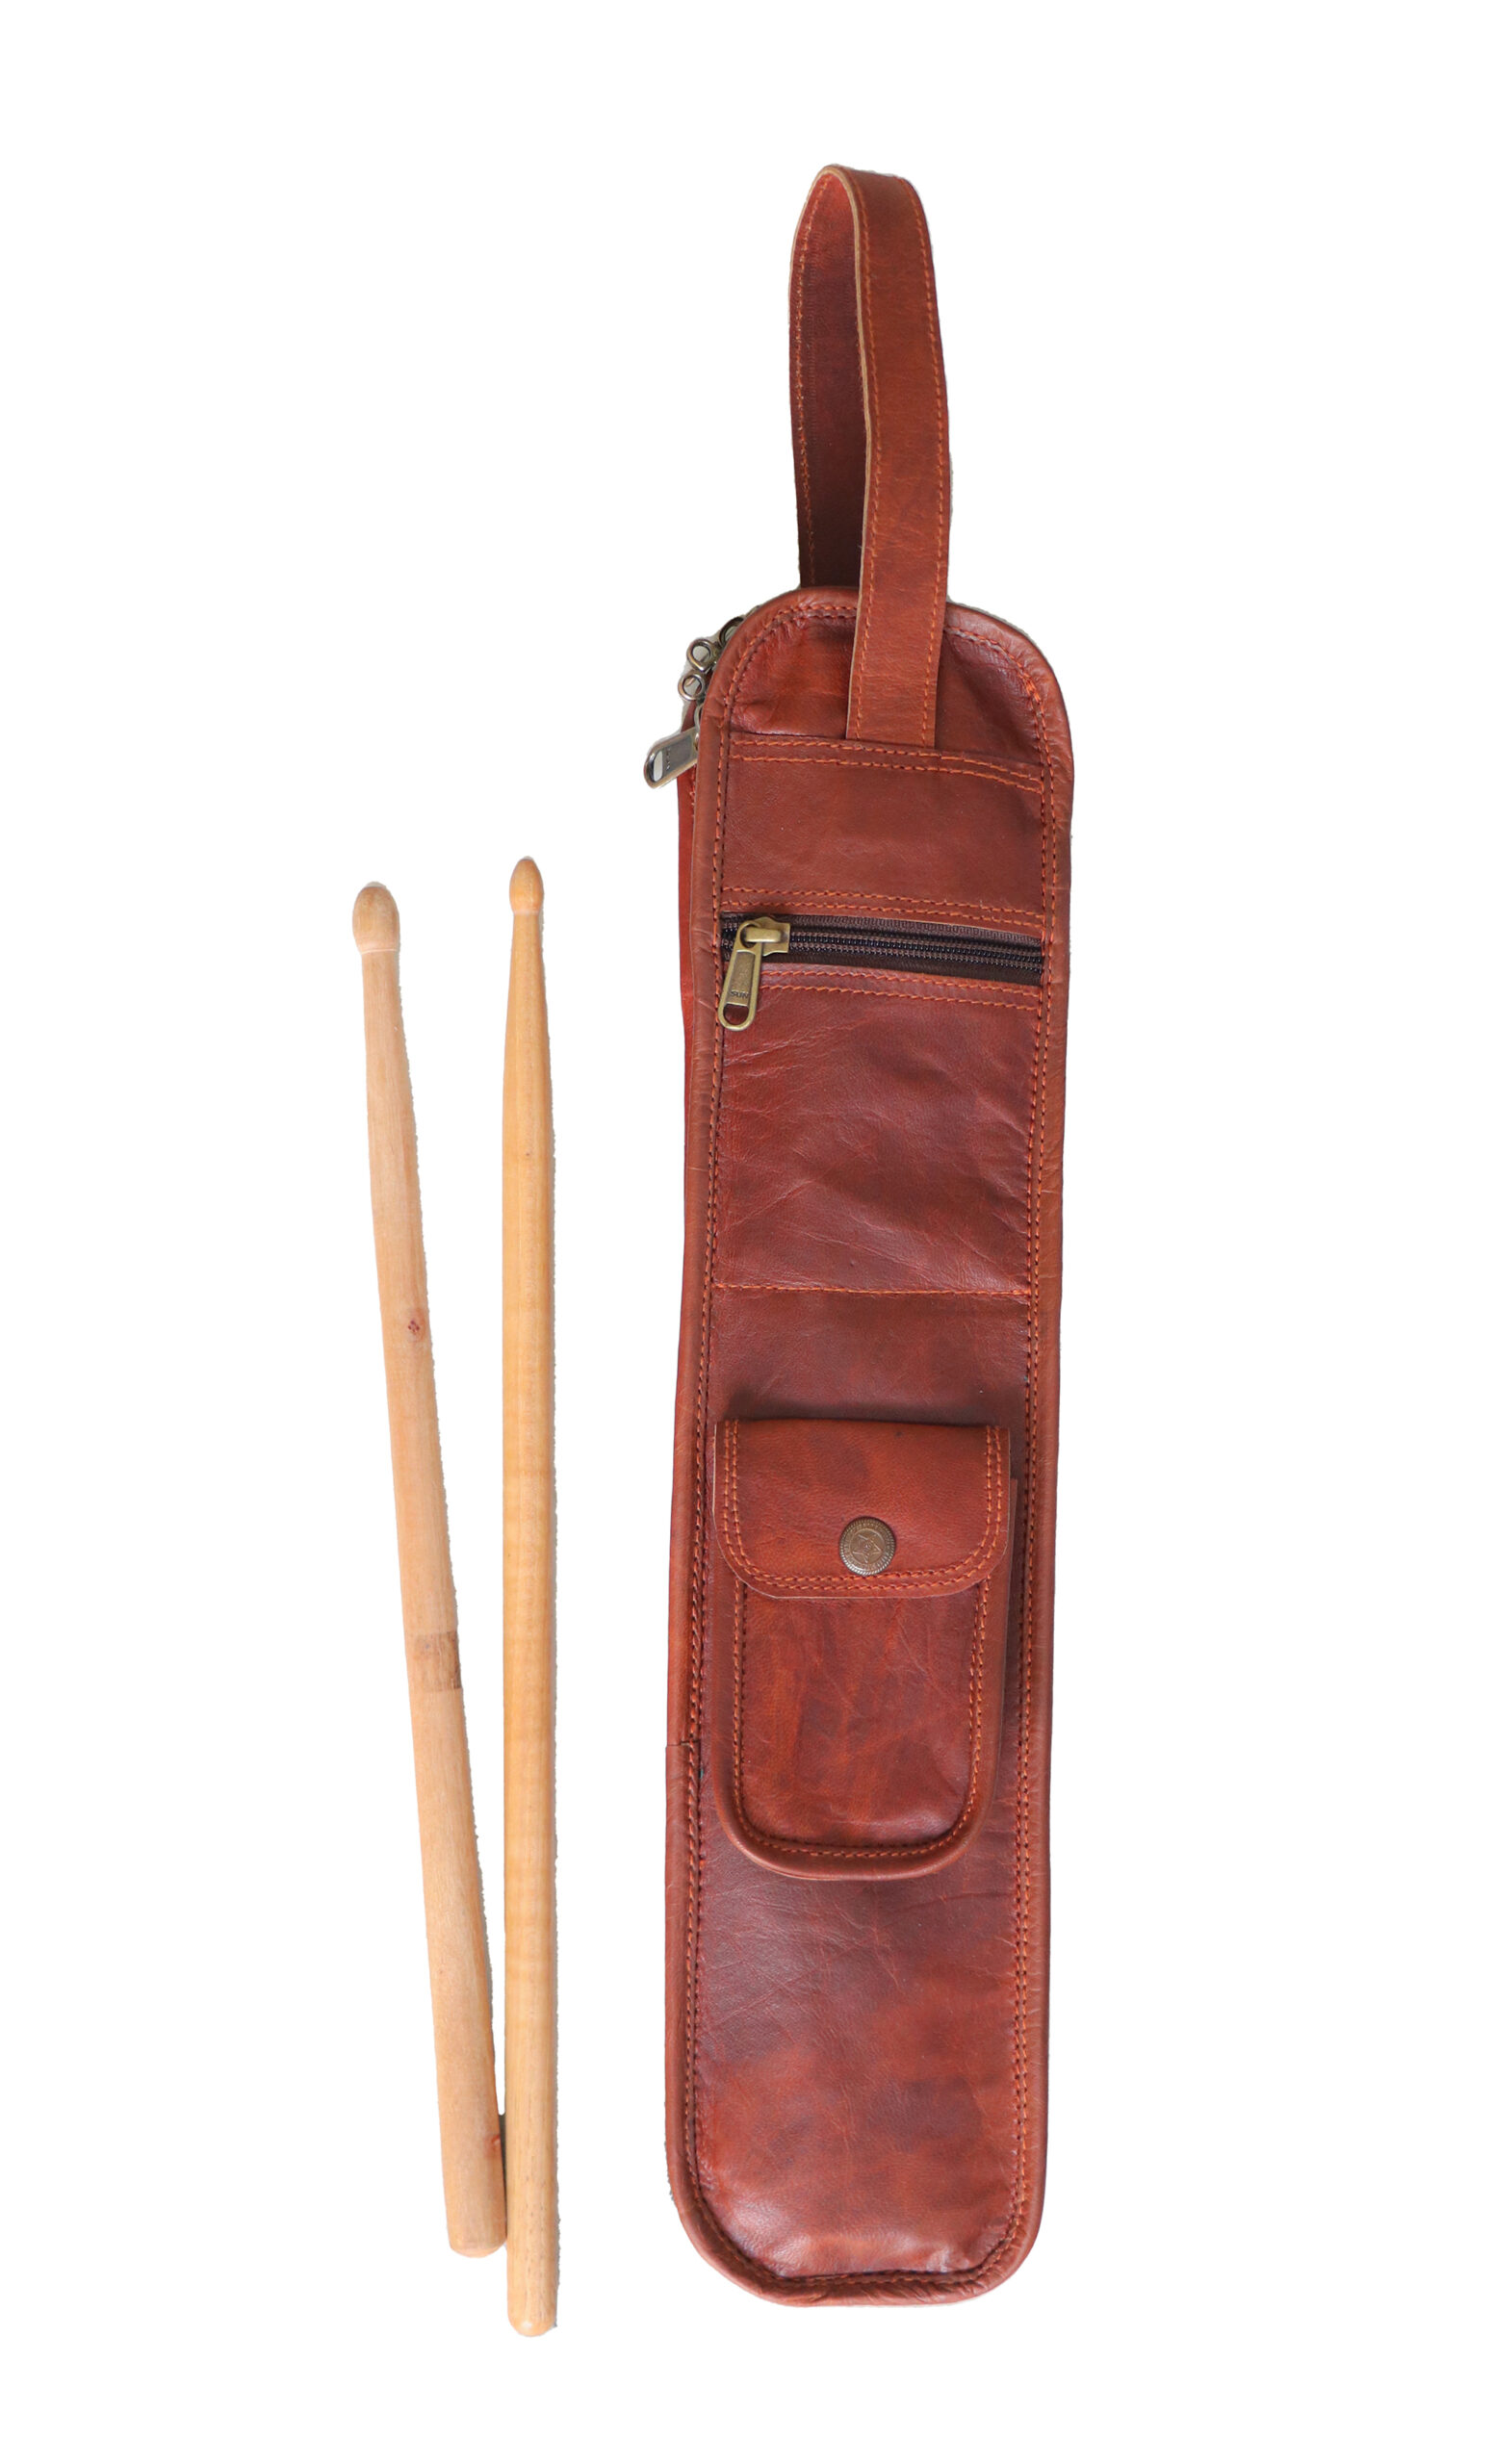 Couch Racing Stripe Drum Stick Bag